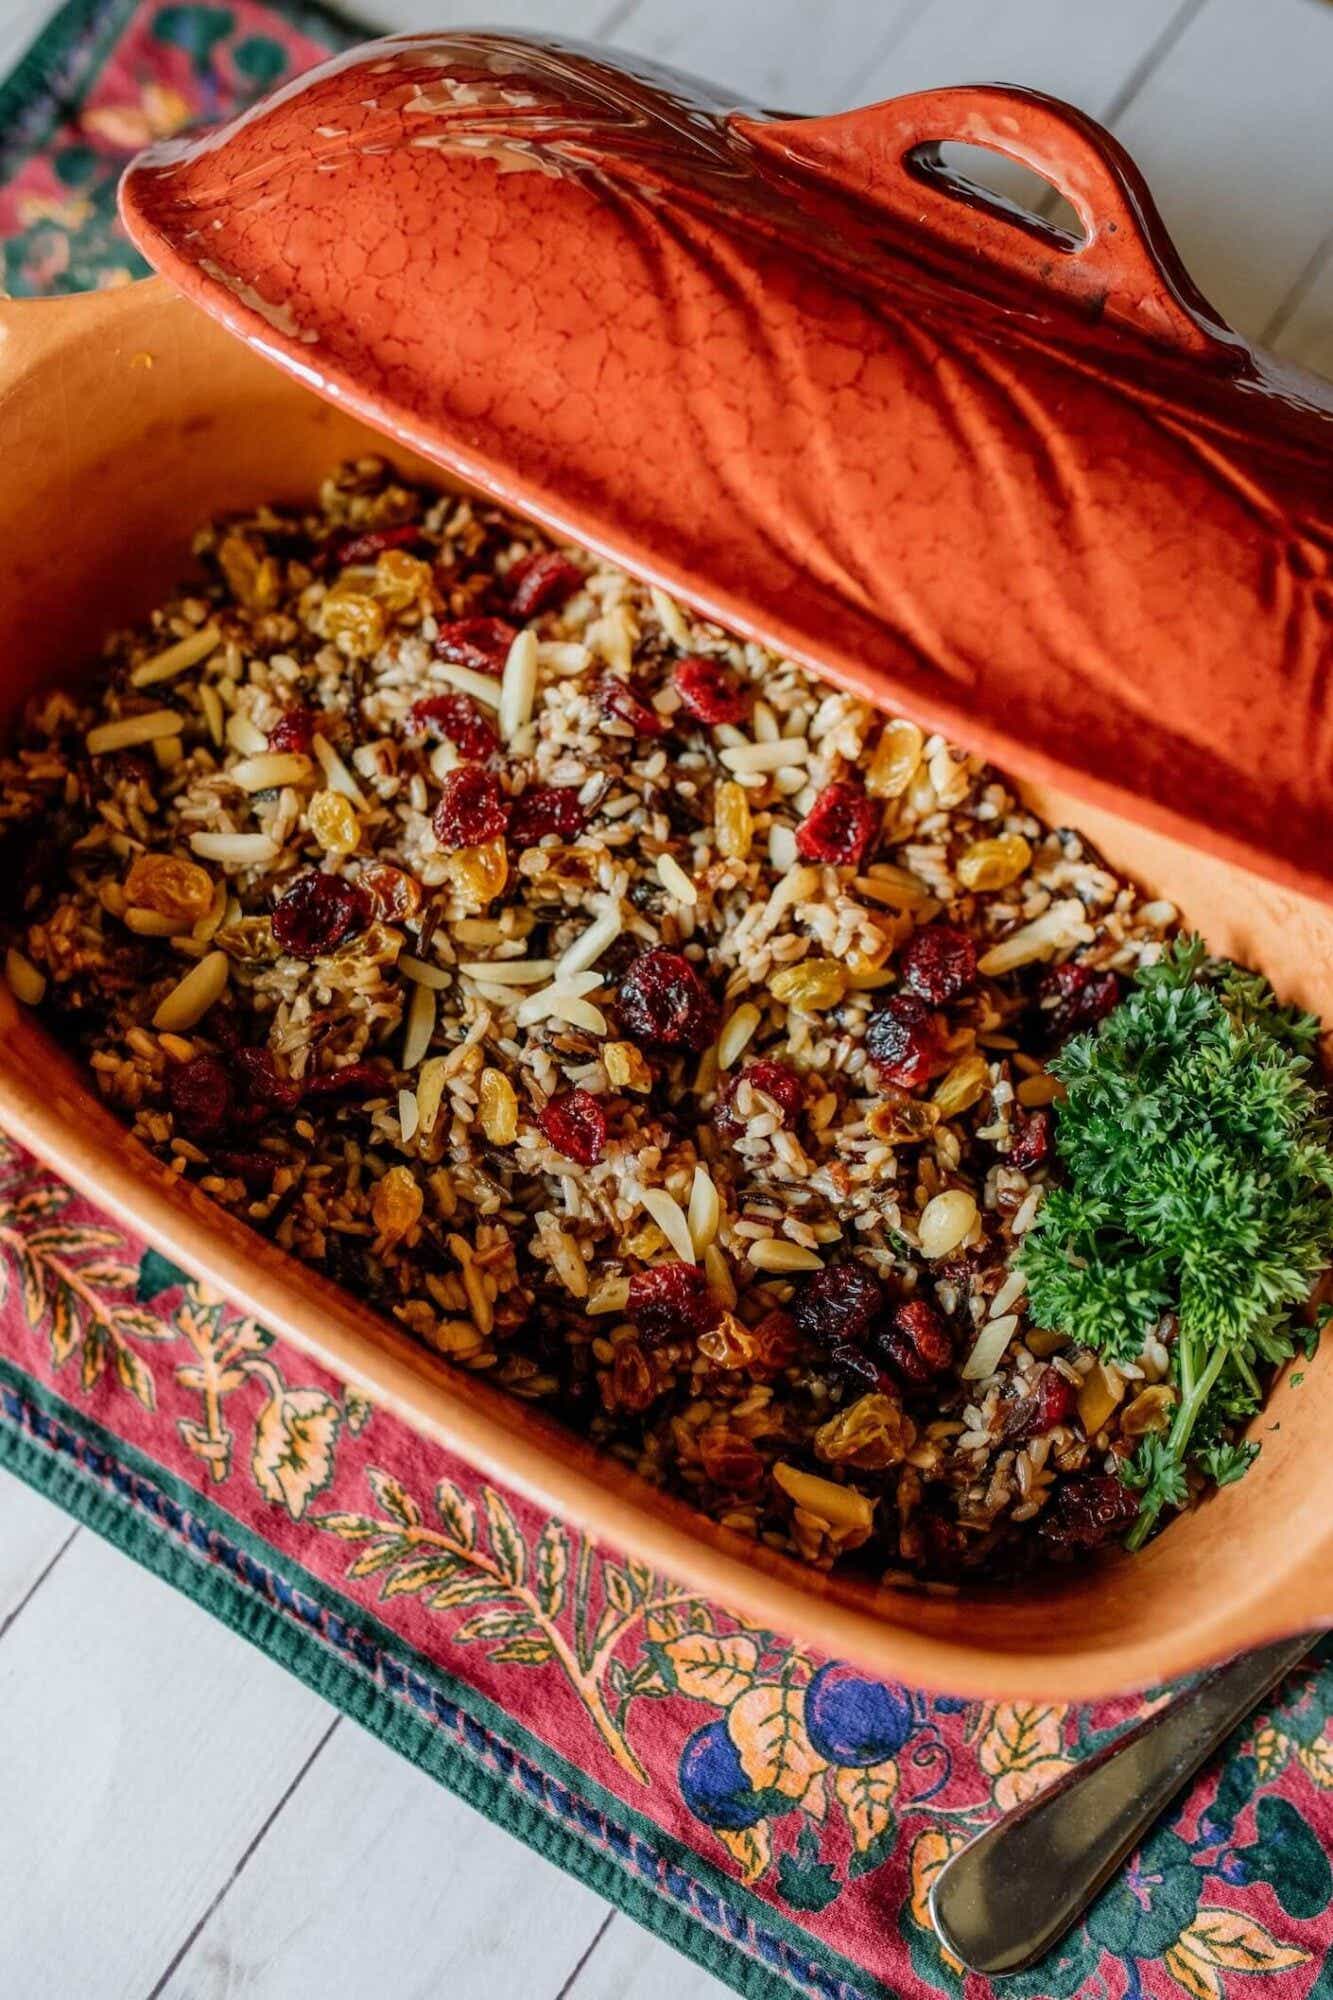 A roasting pan is full of a cranberry wild rice medley garnished with parsley.